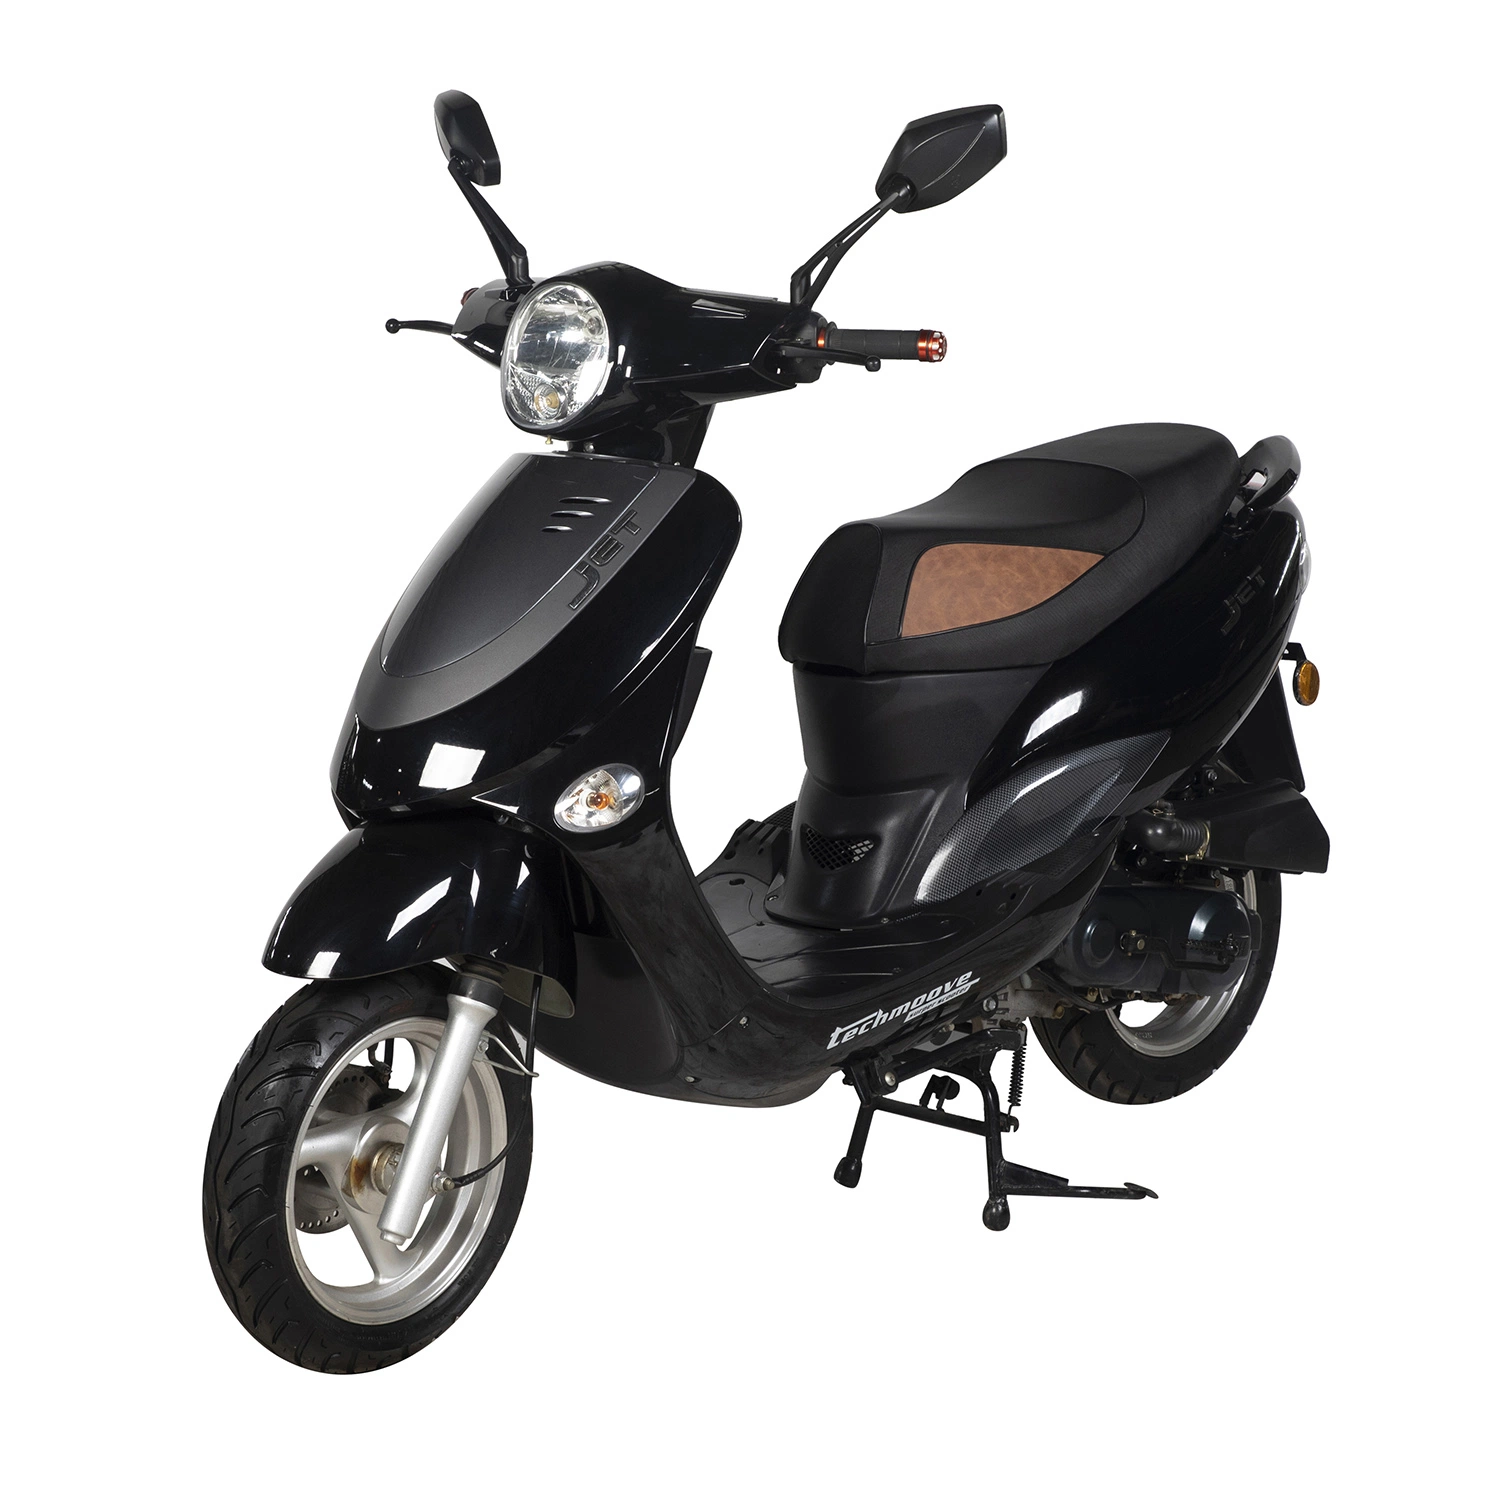 Popular 50cc Motorcycle 125cc Motorbike 150cc Gas Scooter with CE LG